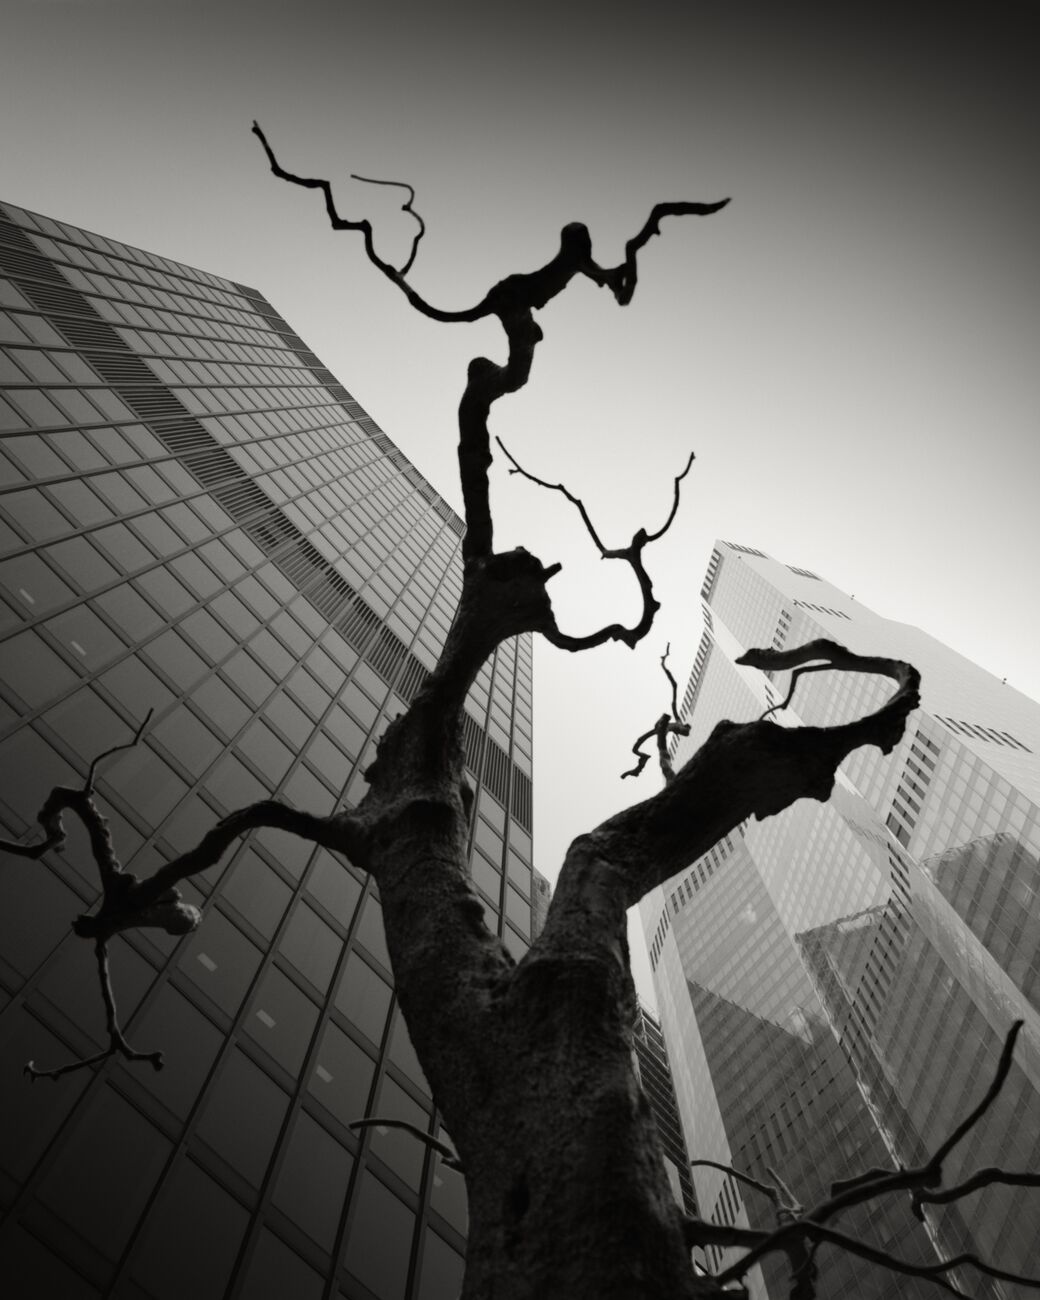 Dead Tree, The City, London, England. August 2022. Ref-11633 - Denis Olivier Photography